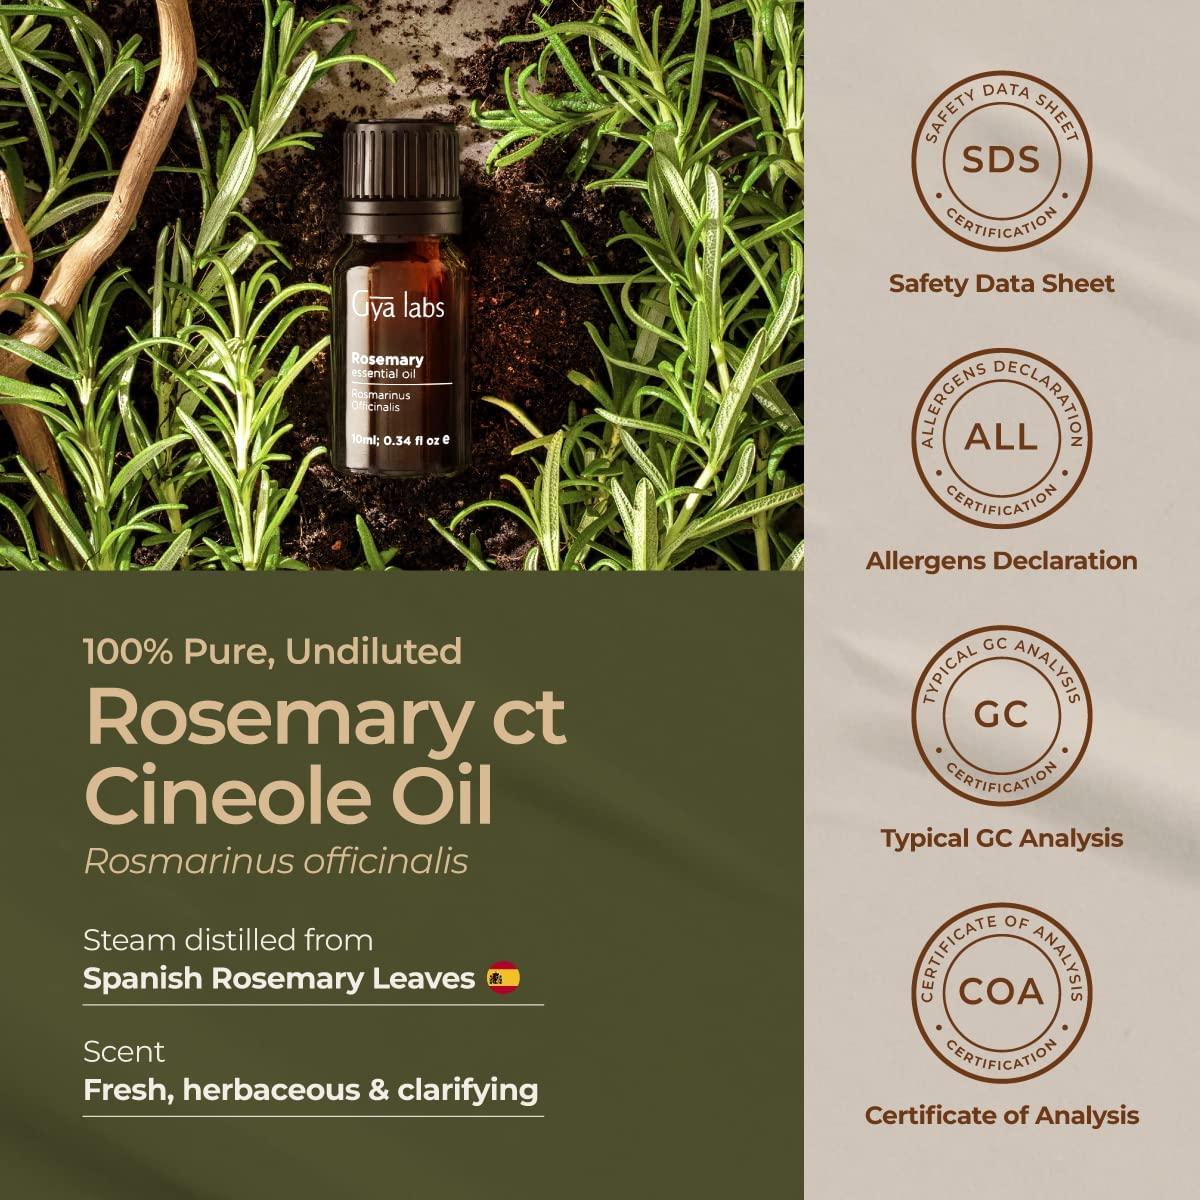 Gya Labs Rosemary Essential Oil - 100% Pure Therapeutic Grade for Skin, Scalp, Hair Loss, Relaxation, Diffuser - 10ml